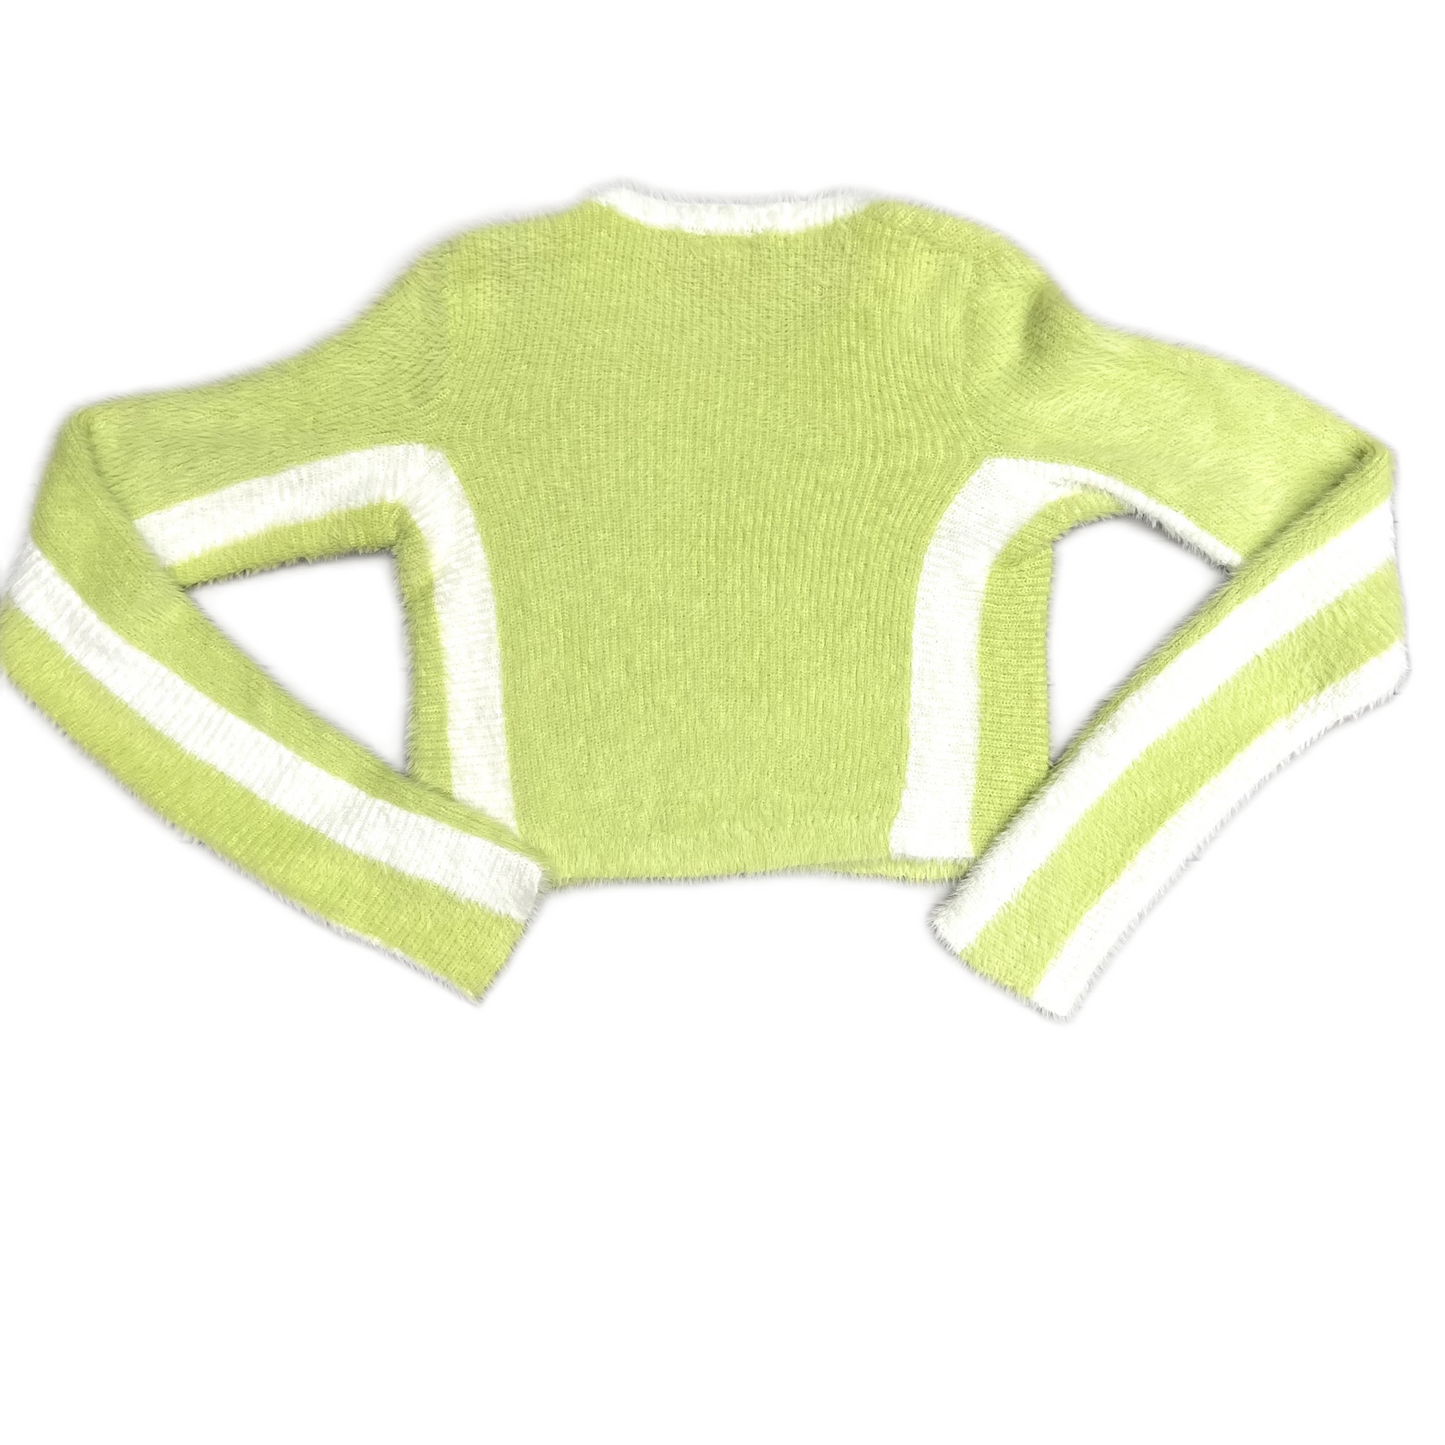 Green & White Sweater By For Love & Lemons, Size: S